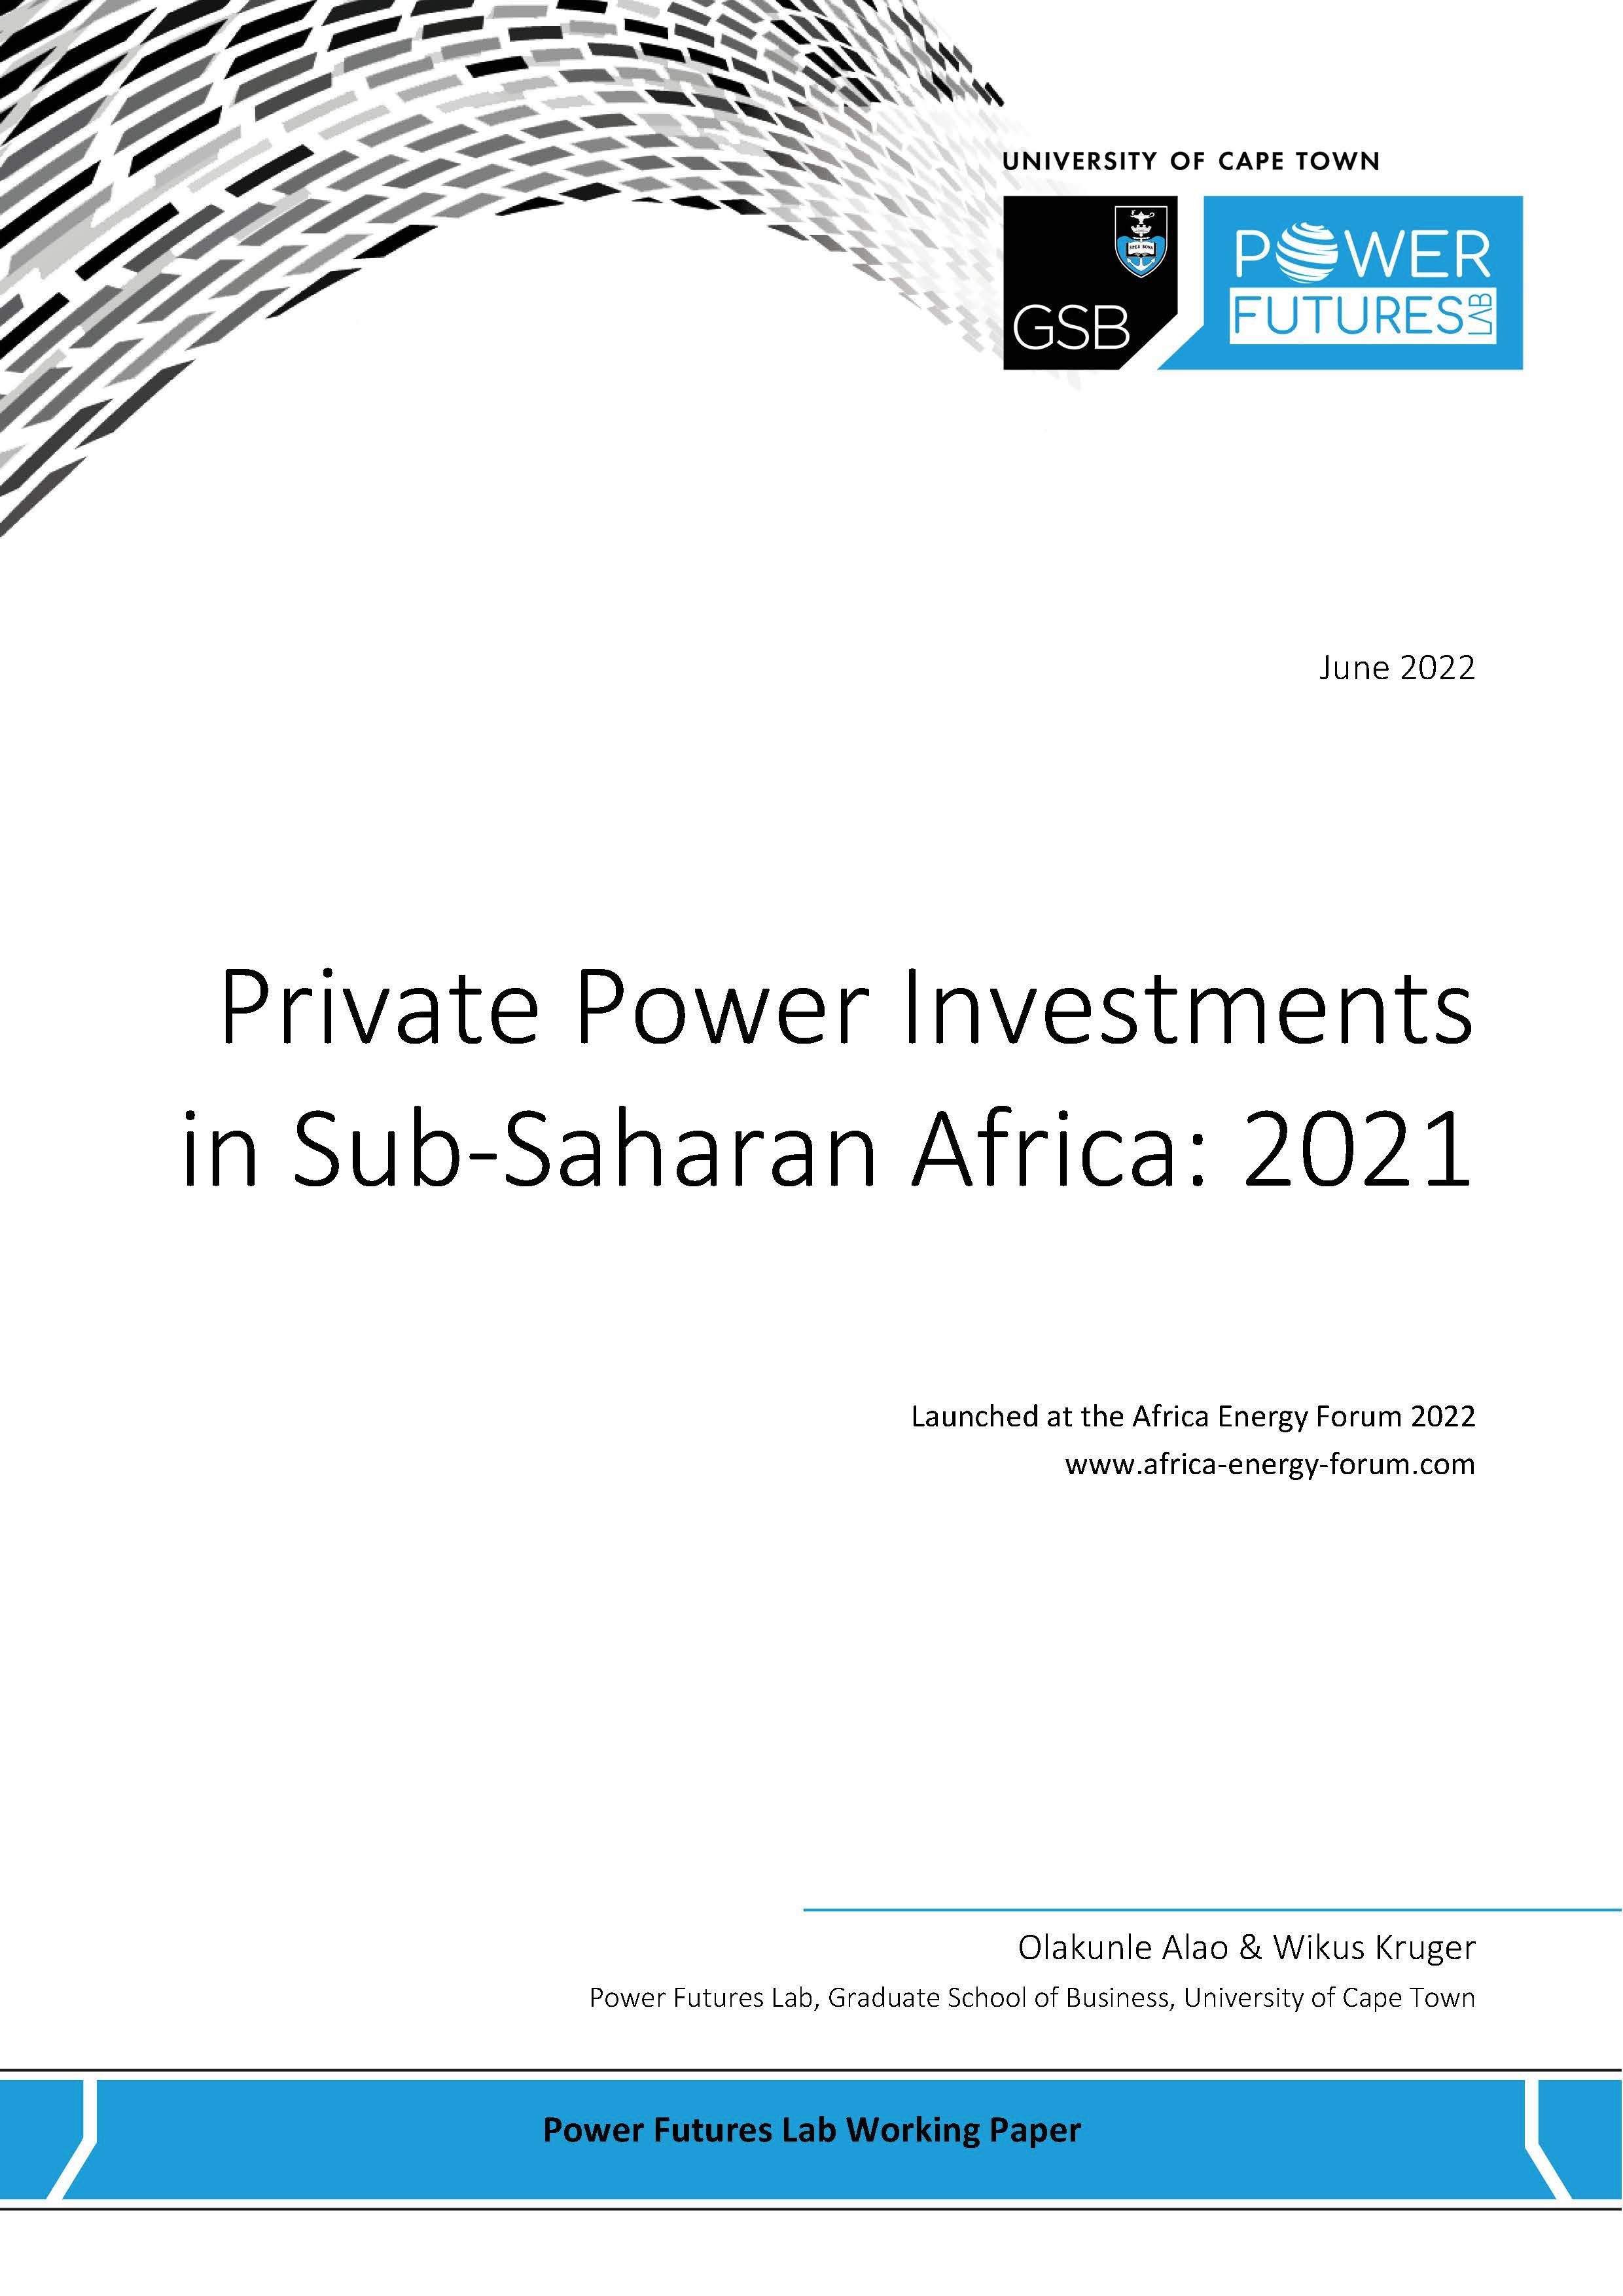 Private Power Investment